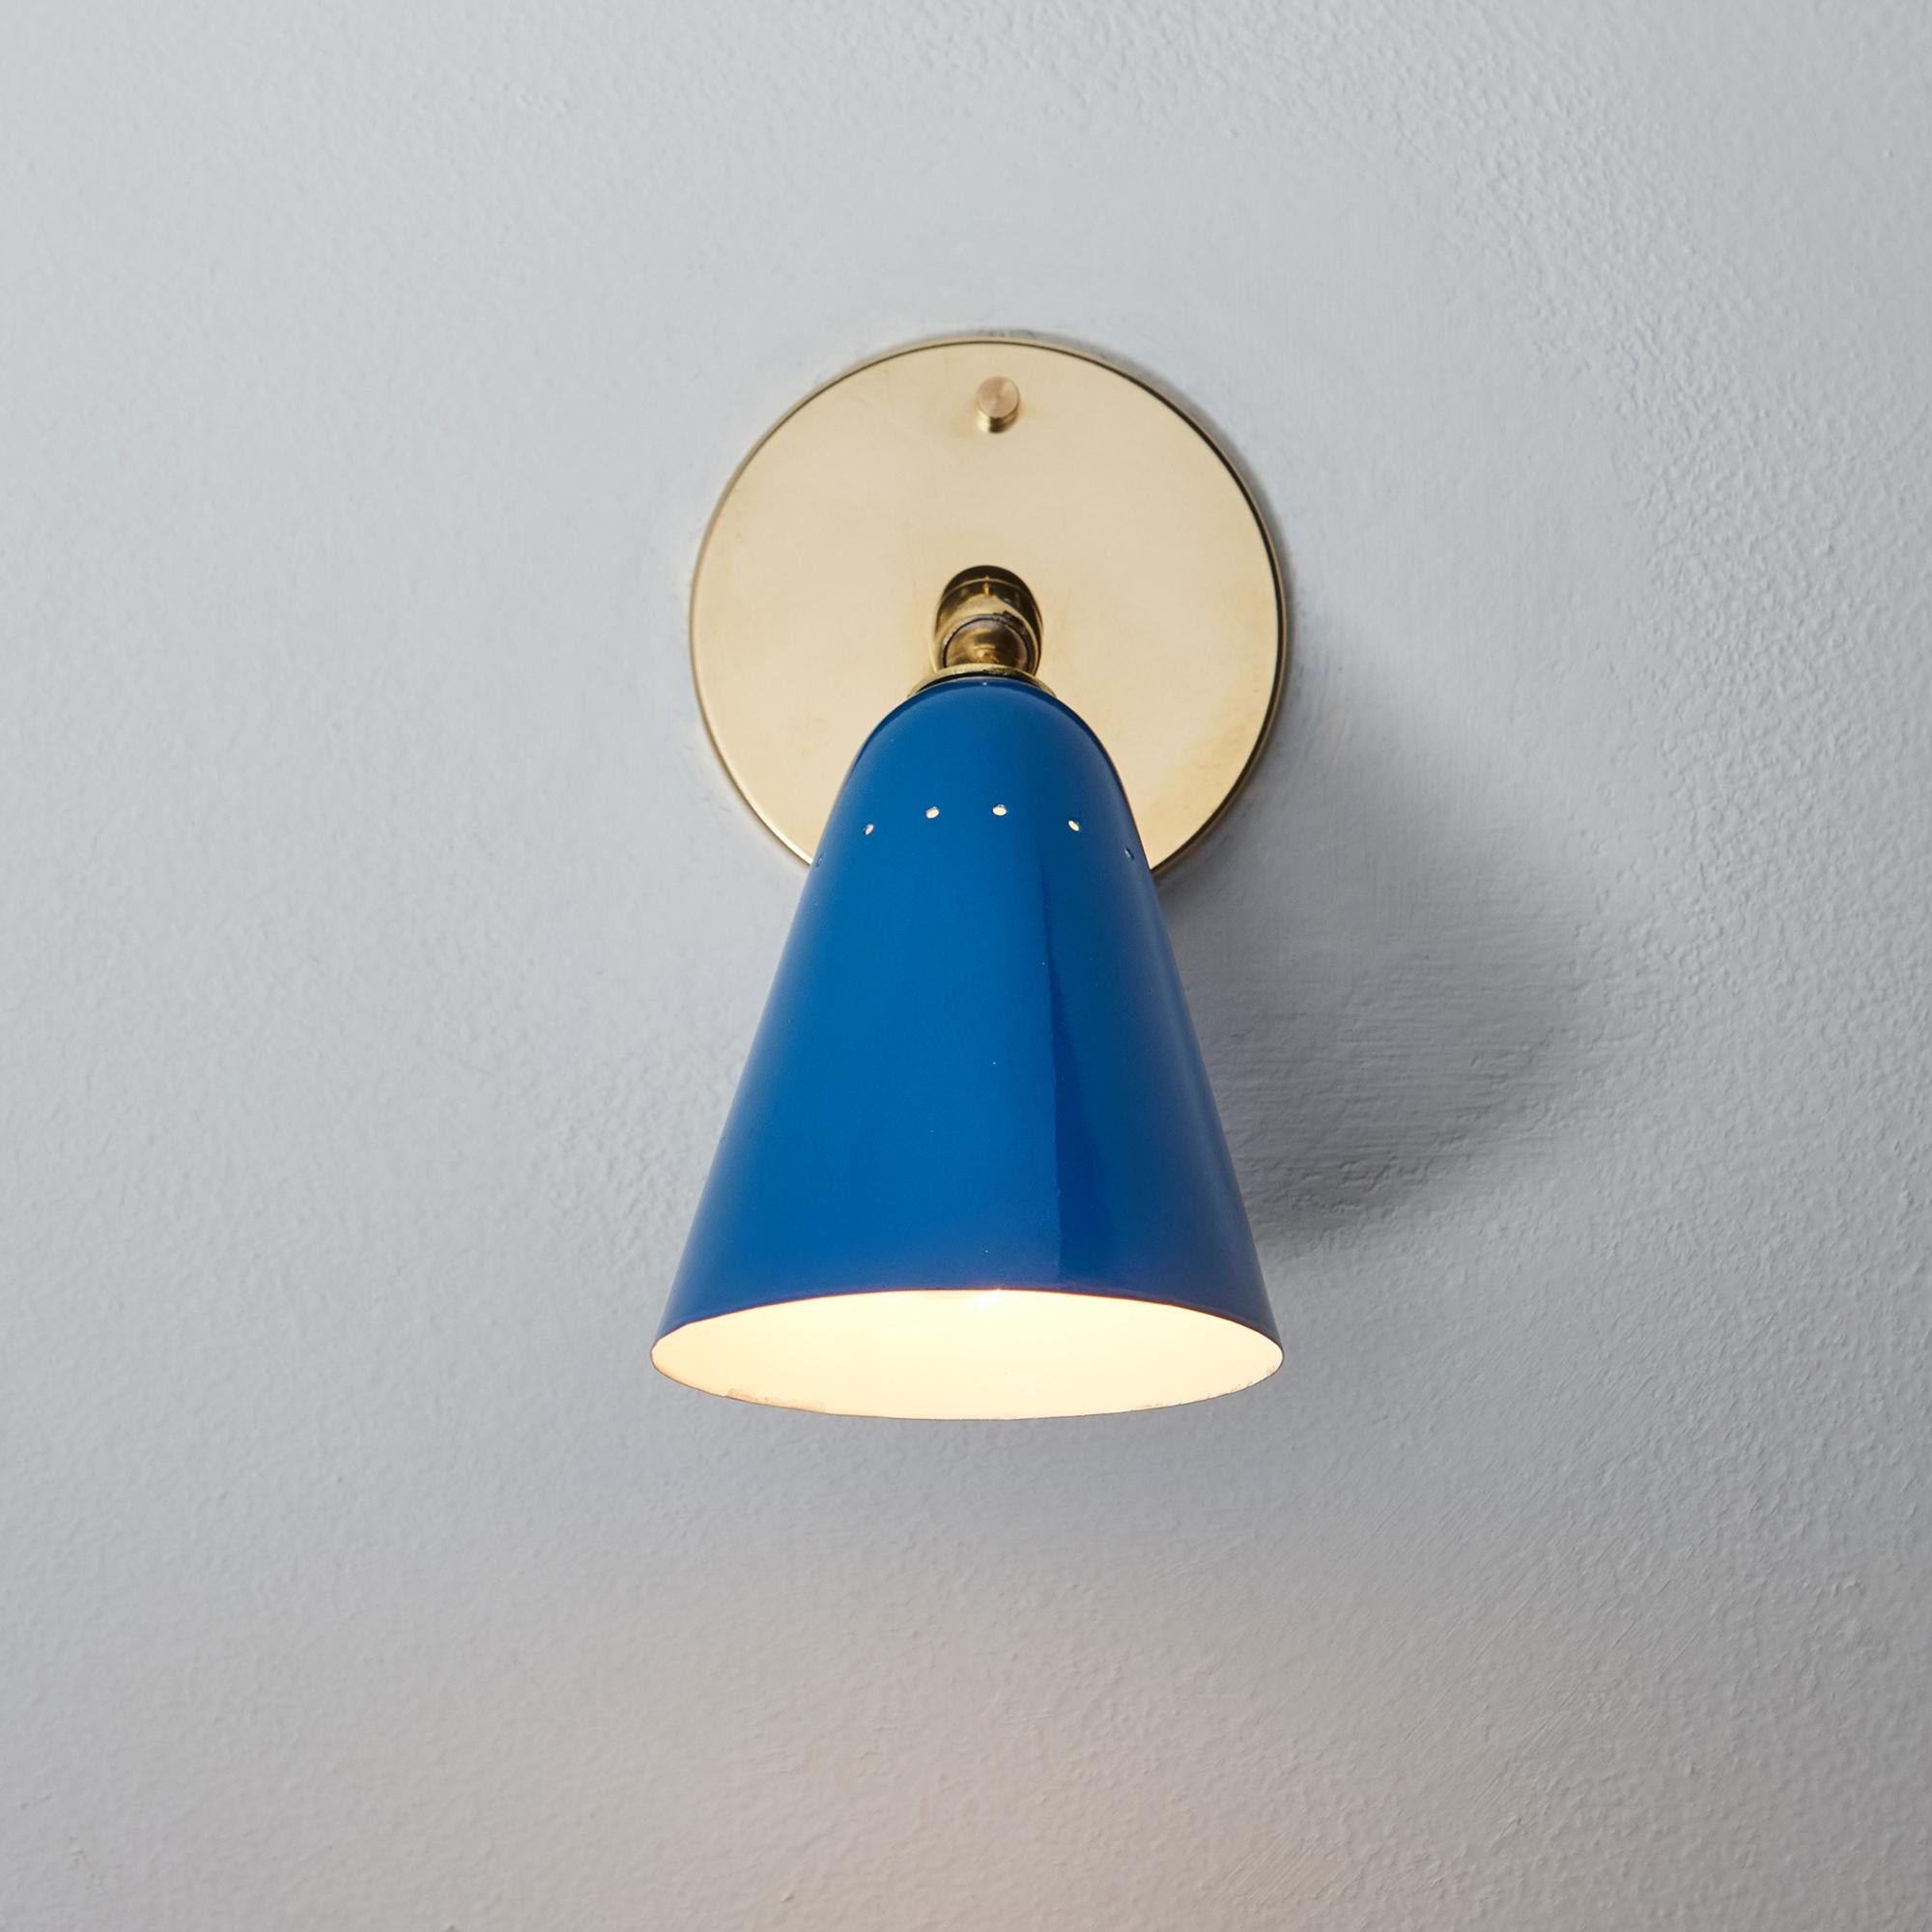 Gino Sarfatti Model #26b Blue and Brass Wall Lamp for Arteluce. Executed in blue painted aluminum with a brass backplate. Double ball jointed arm allows flexible shade adjustments and multiple configurations. The simplicity of Sarfatti's design and